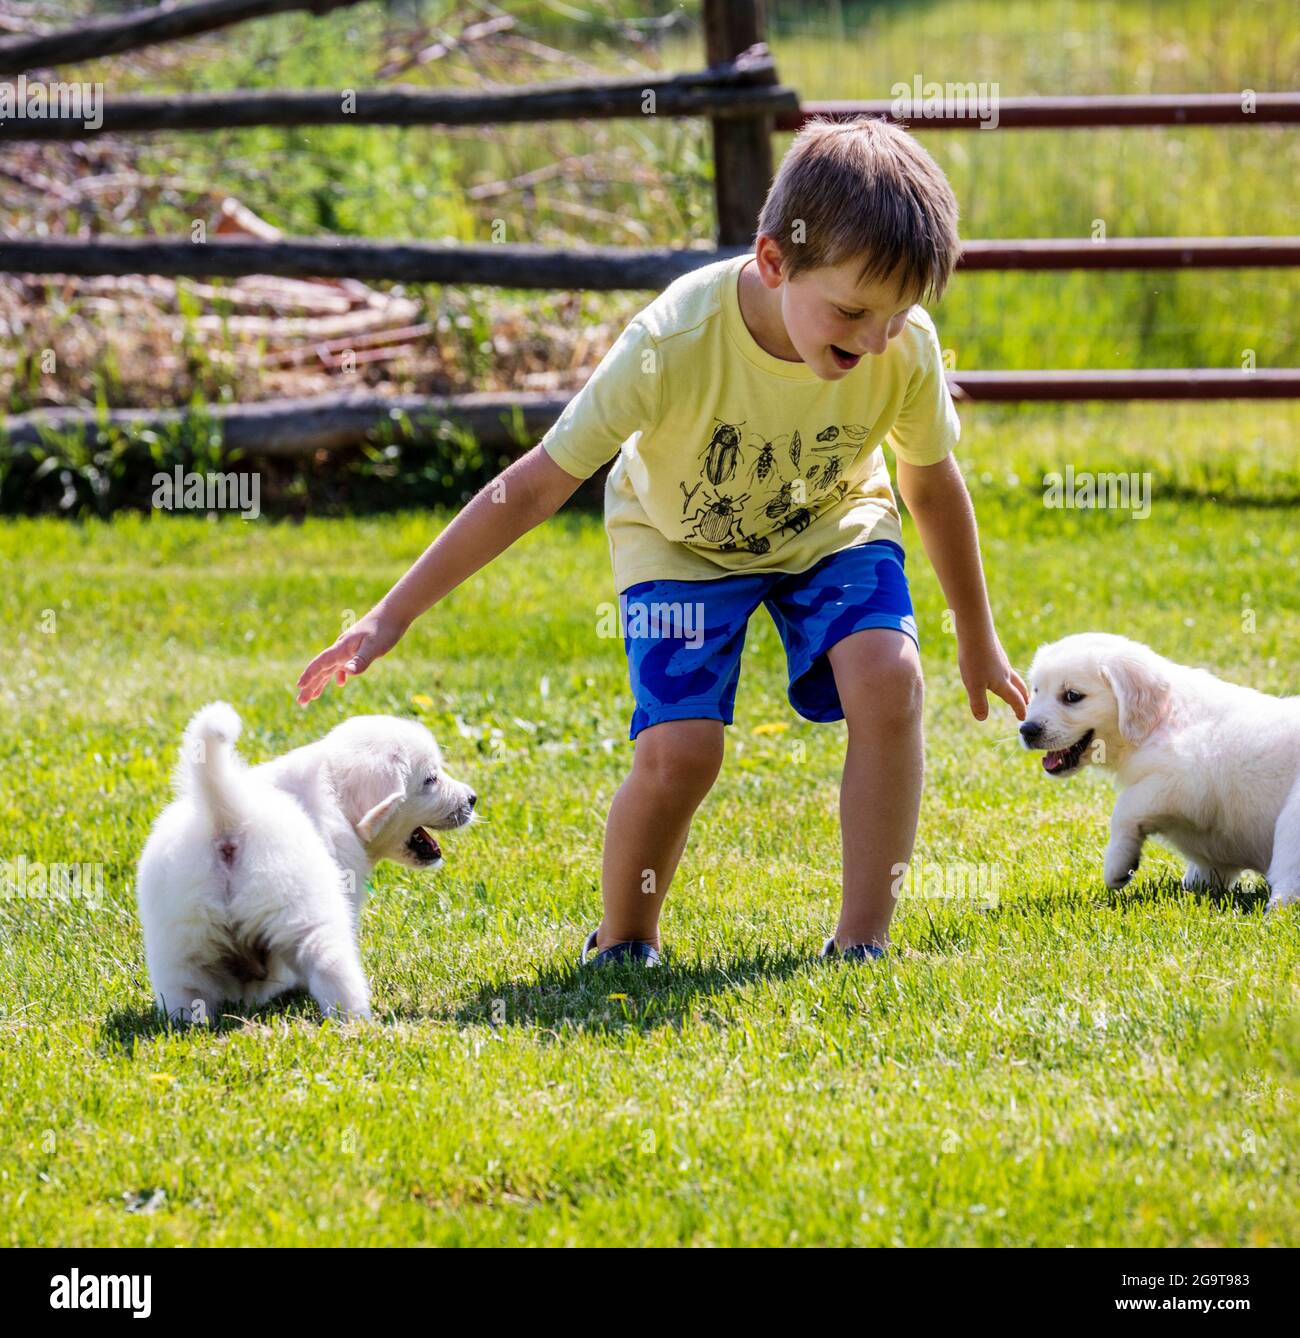 Young boy playing on grass with six week old Platinum, or Cream colored ...